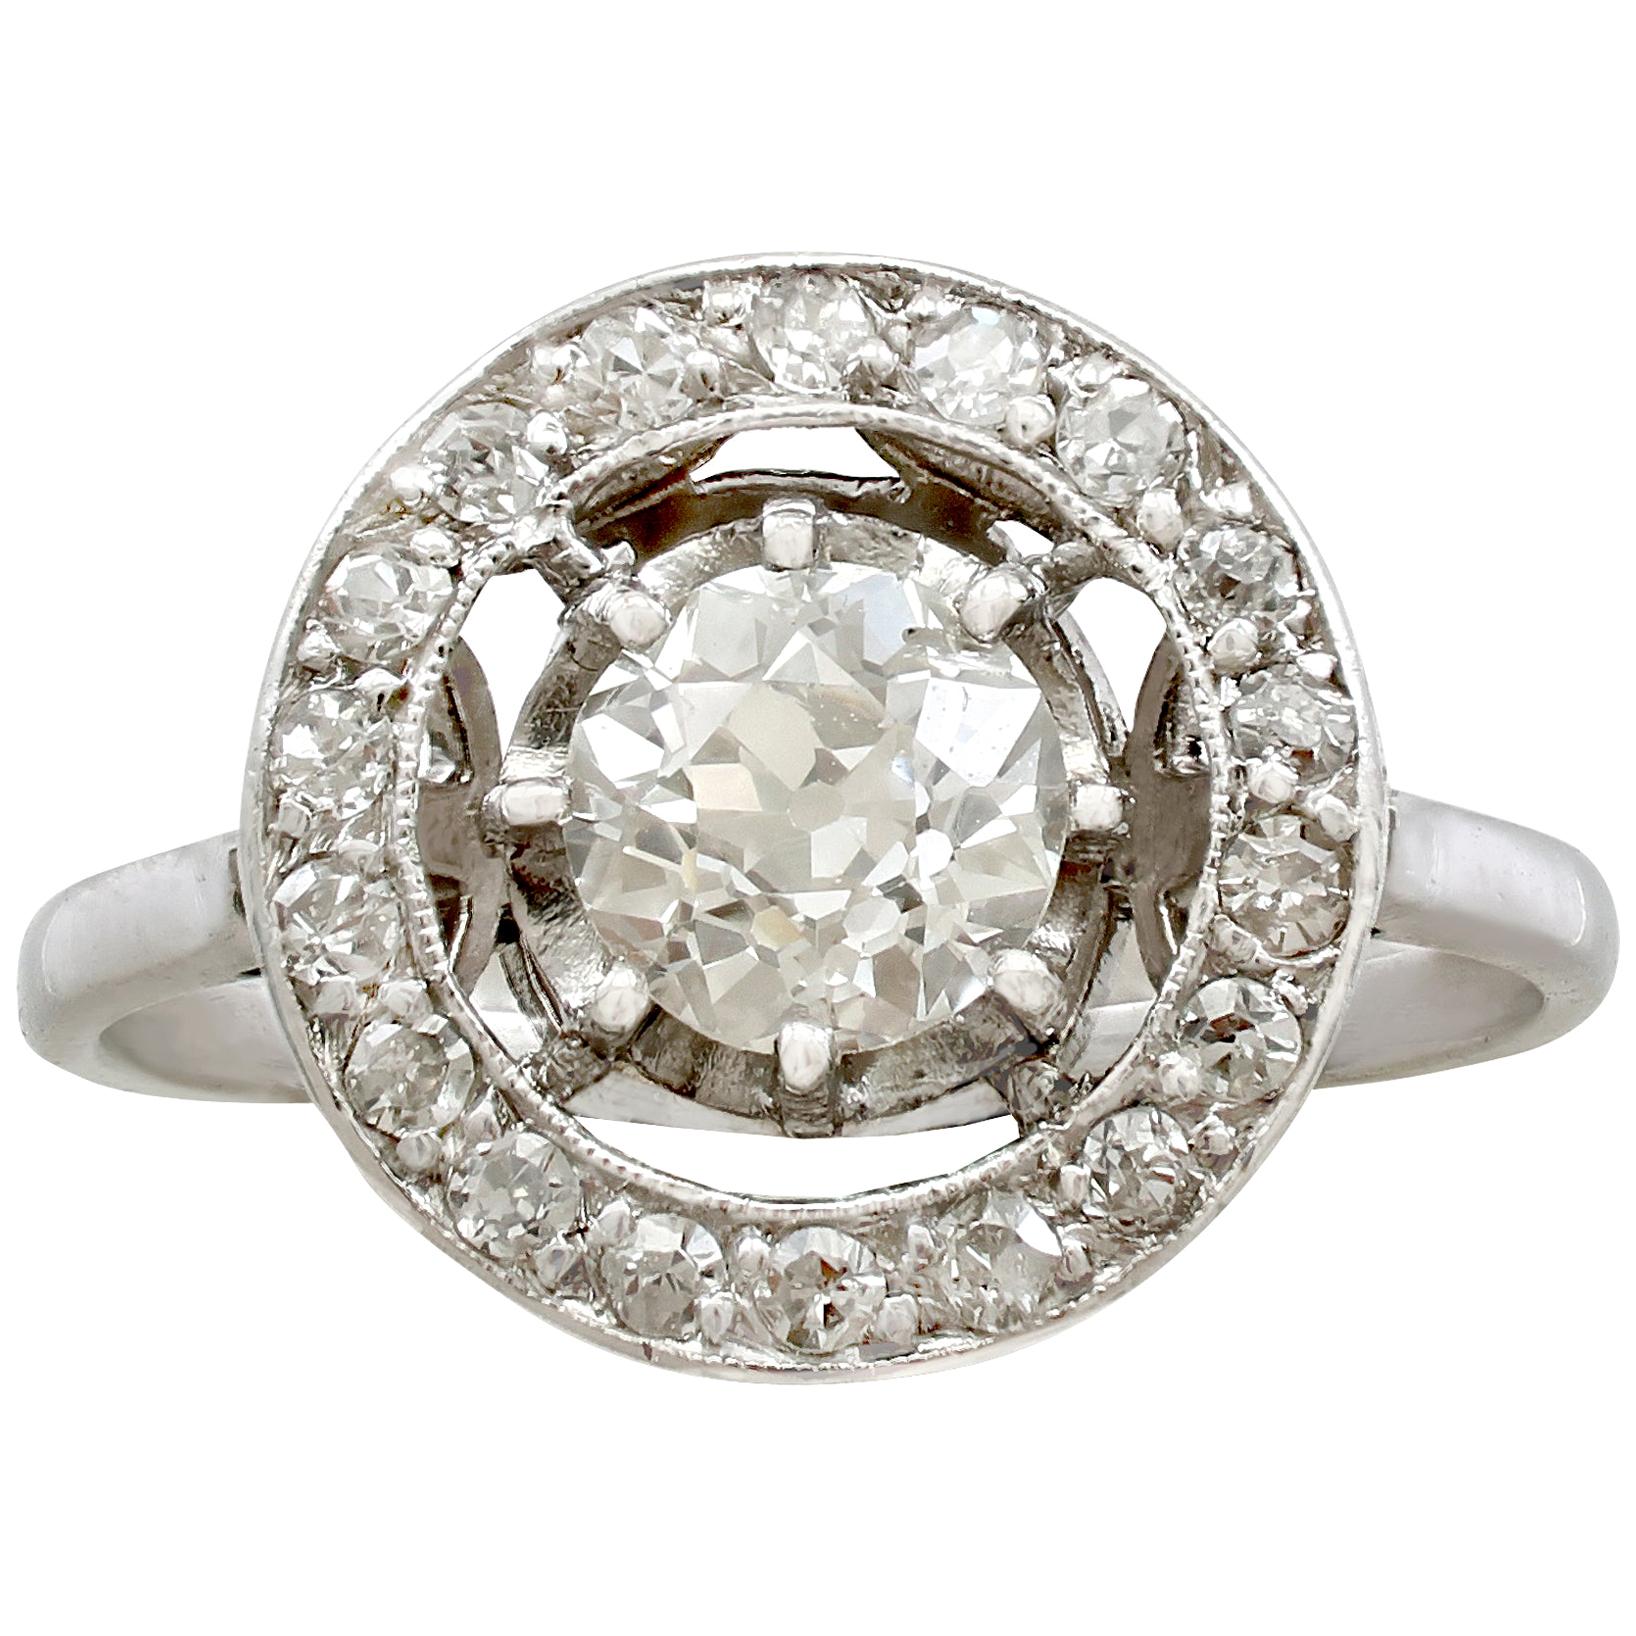 1920s Antique French 1.30 Carat Diamond and Platinum Cluster Ring